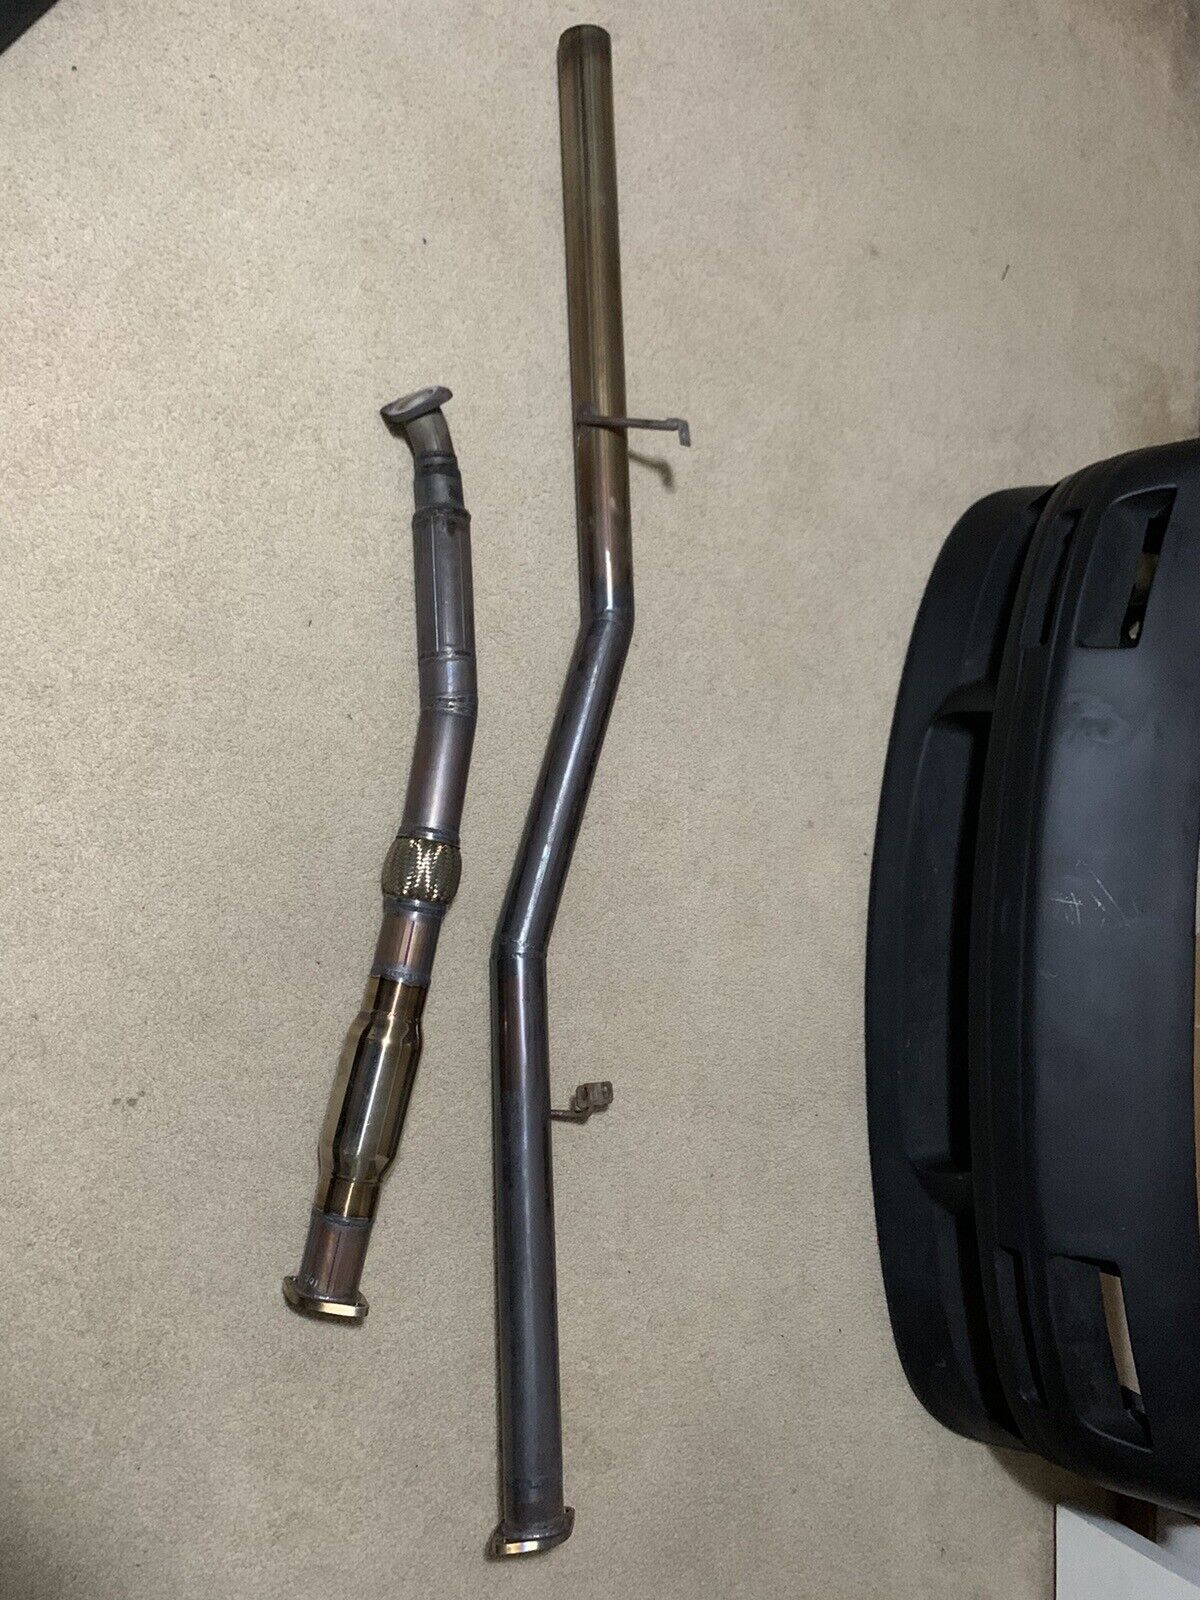 1986-91 RX-7 FC Exhaust.